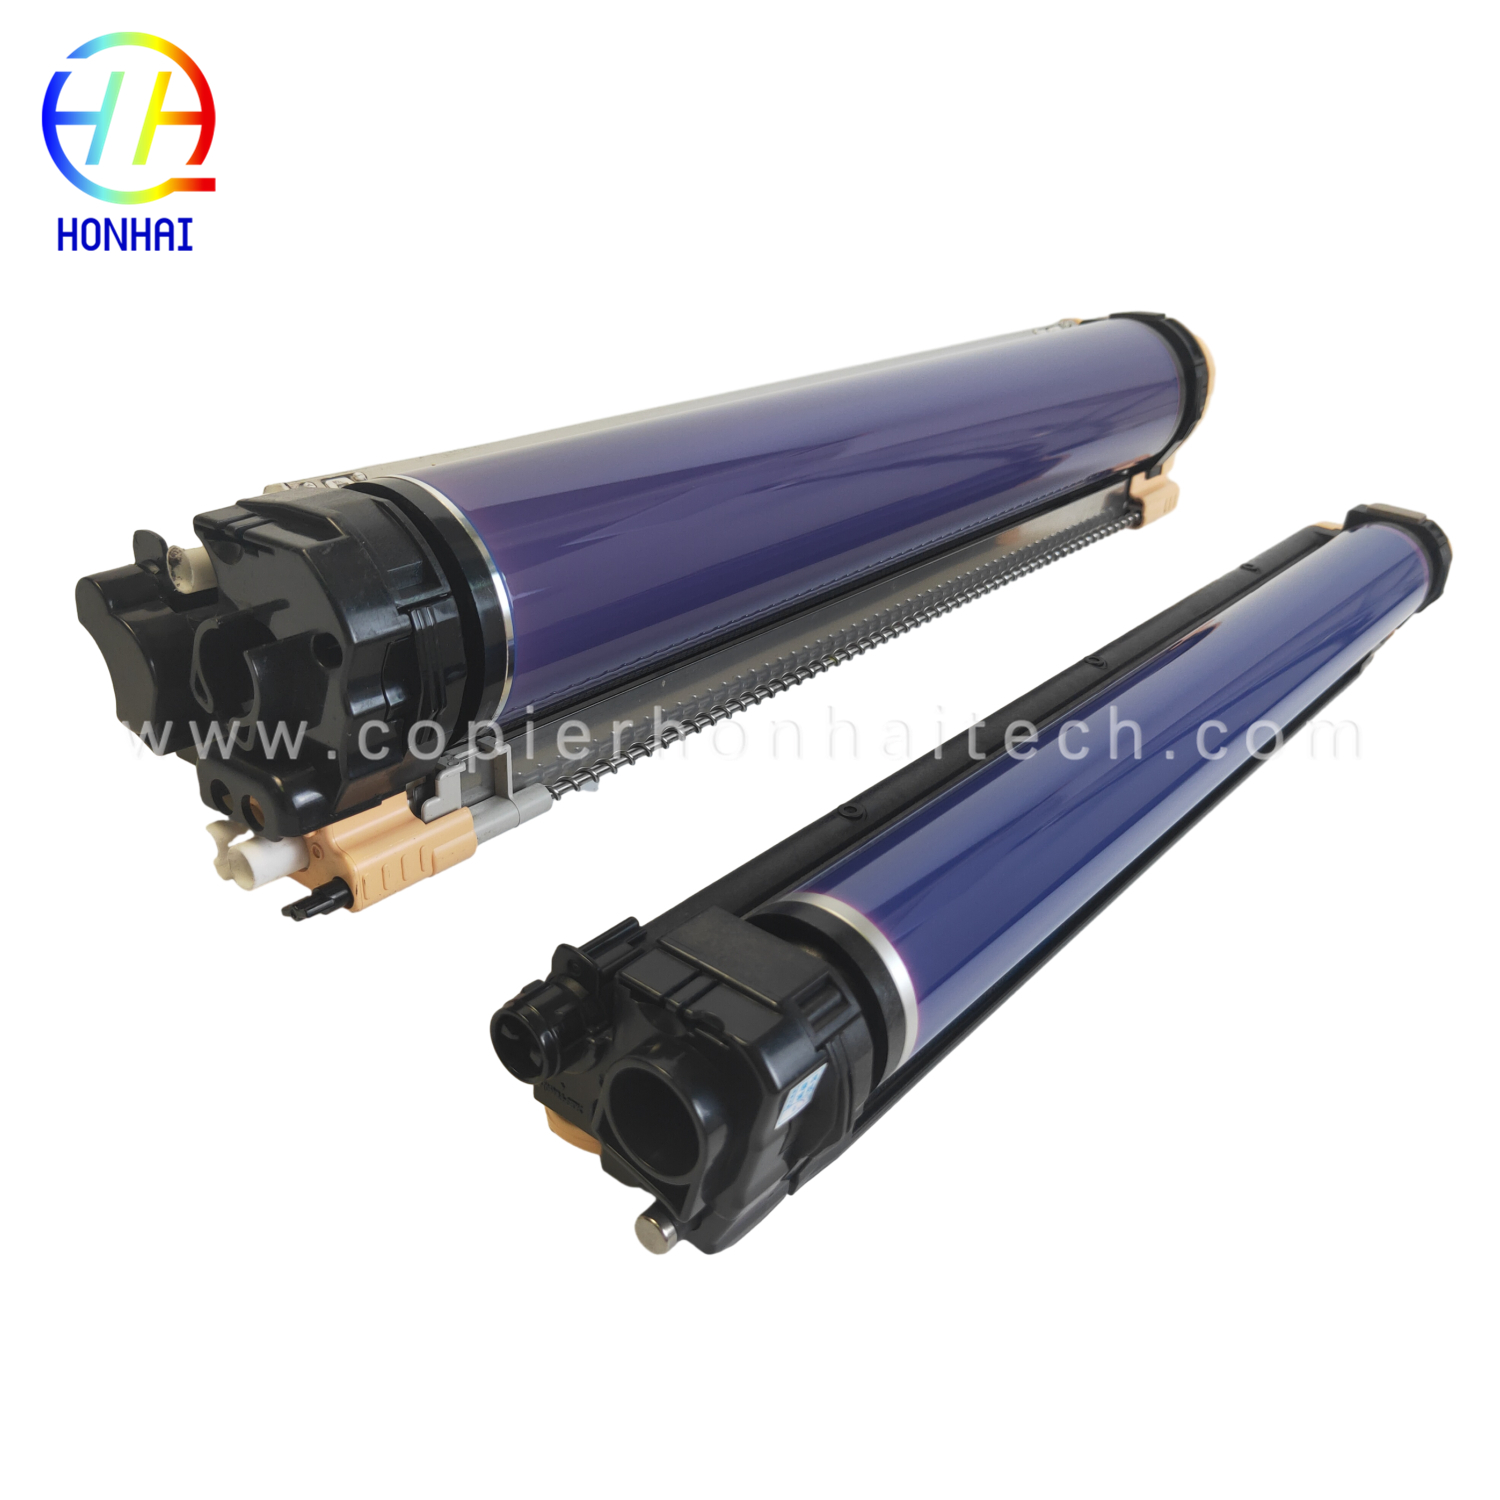 Makatiriji a Drum FUJI OPC Drum for Xerox DocuColor 240 250 242 252 260 WorkCentre 7655 7665 7675 7755 7765 7775 013R00602 013R00603 Drum Unit